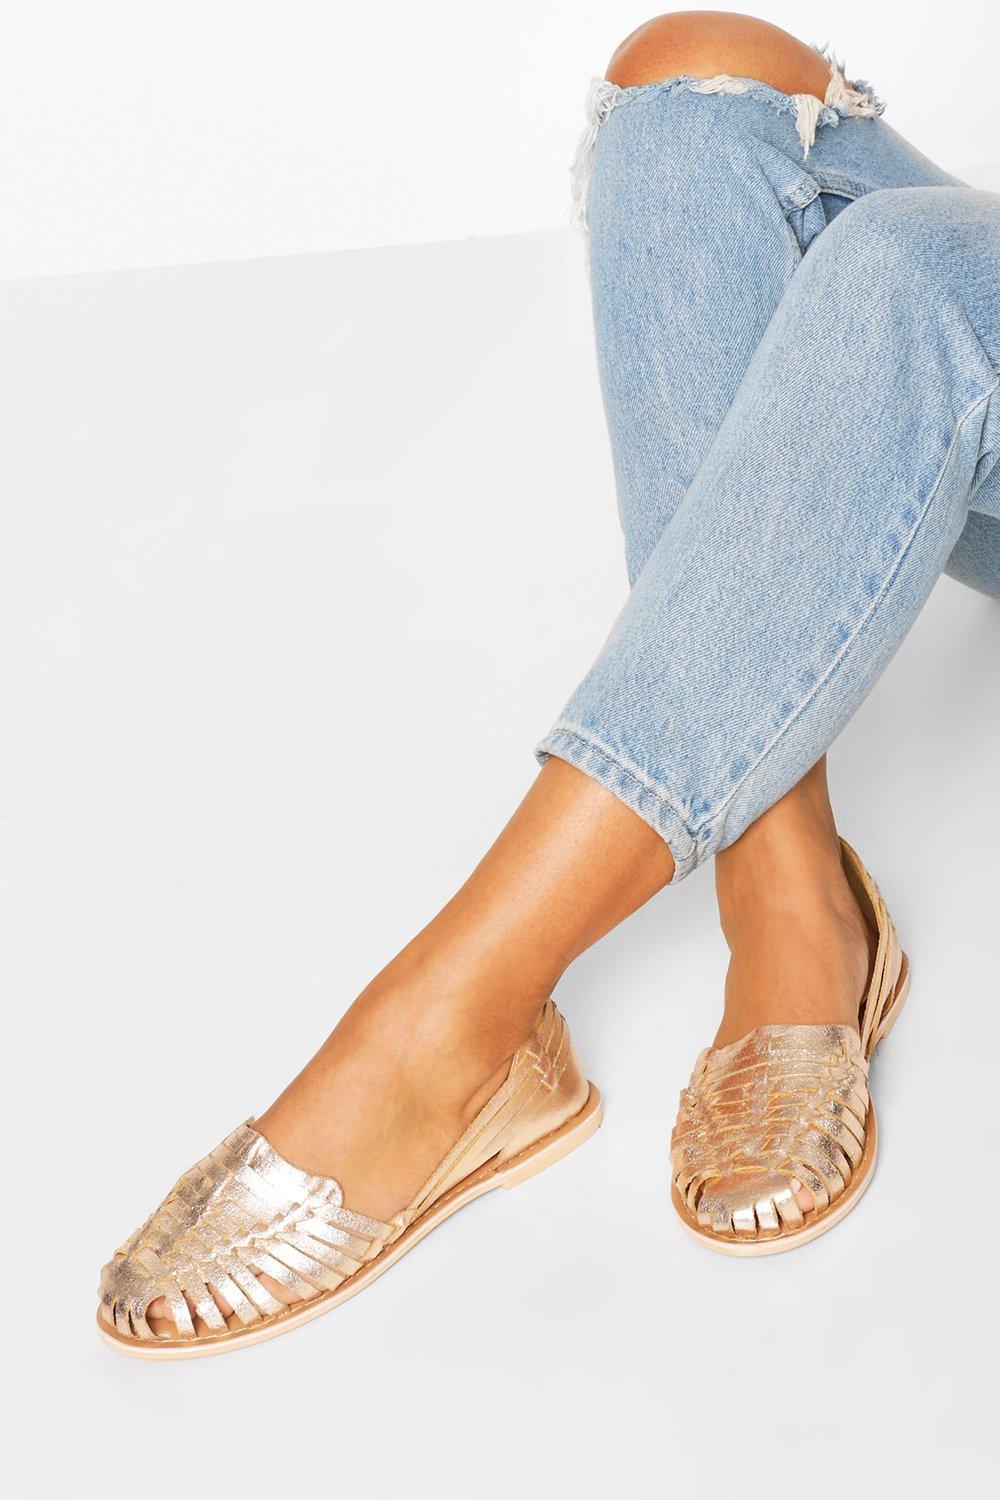 Havaianas Toe Post Sandals in Gold Womens Shoes Flats and flat shoes Flat sandals Metallic 